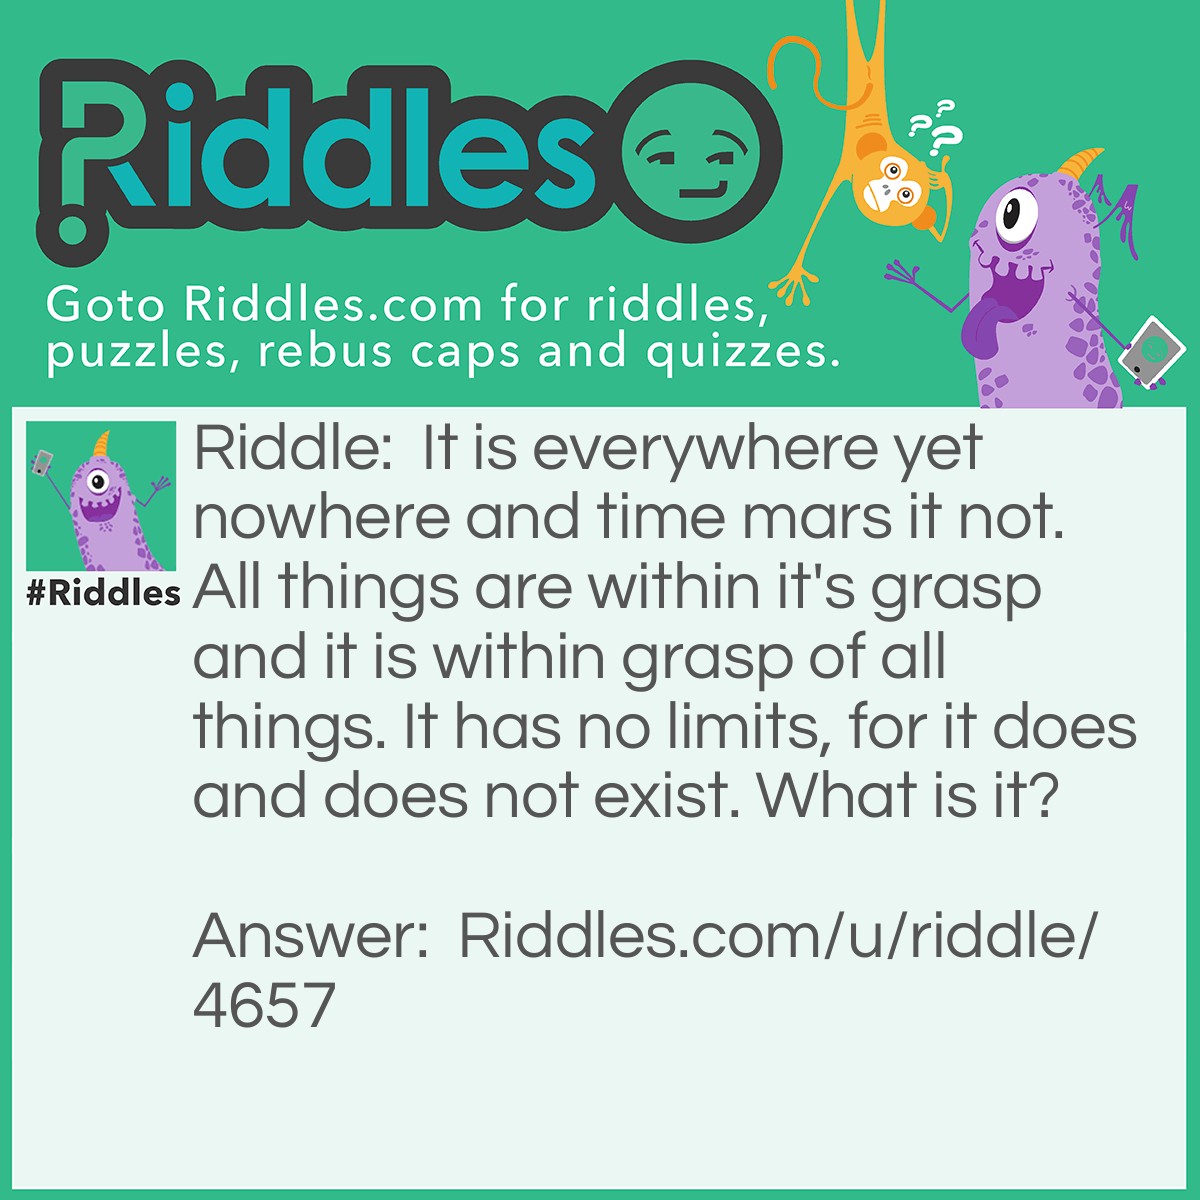 Riddle: It is everywhere yet nowhere and time mars it not. All things are within it's grasp and it is within grasp of all things. It has no limits, for it does and does not exist. What is it? Answer: Nothing.